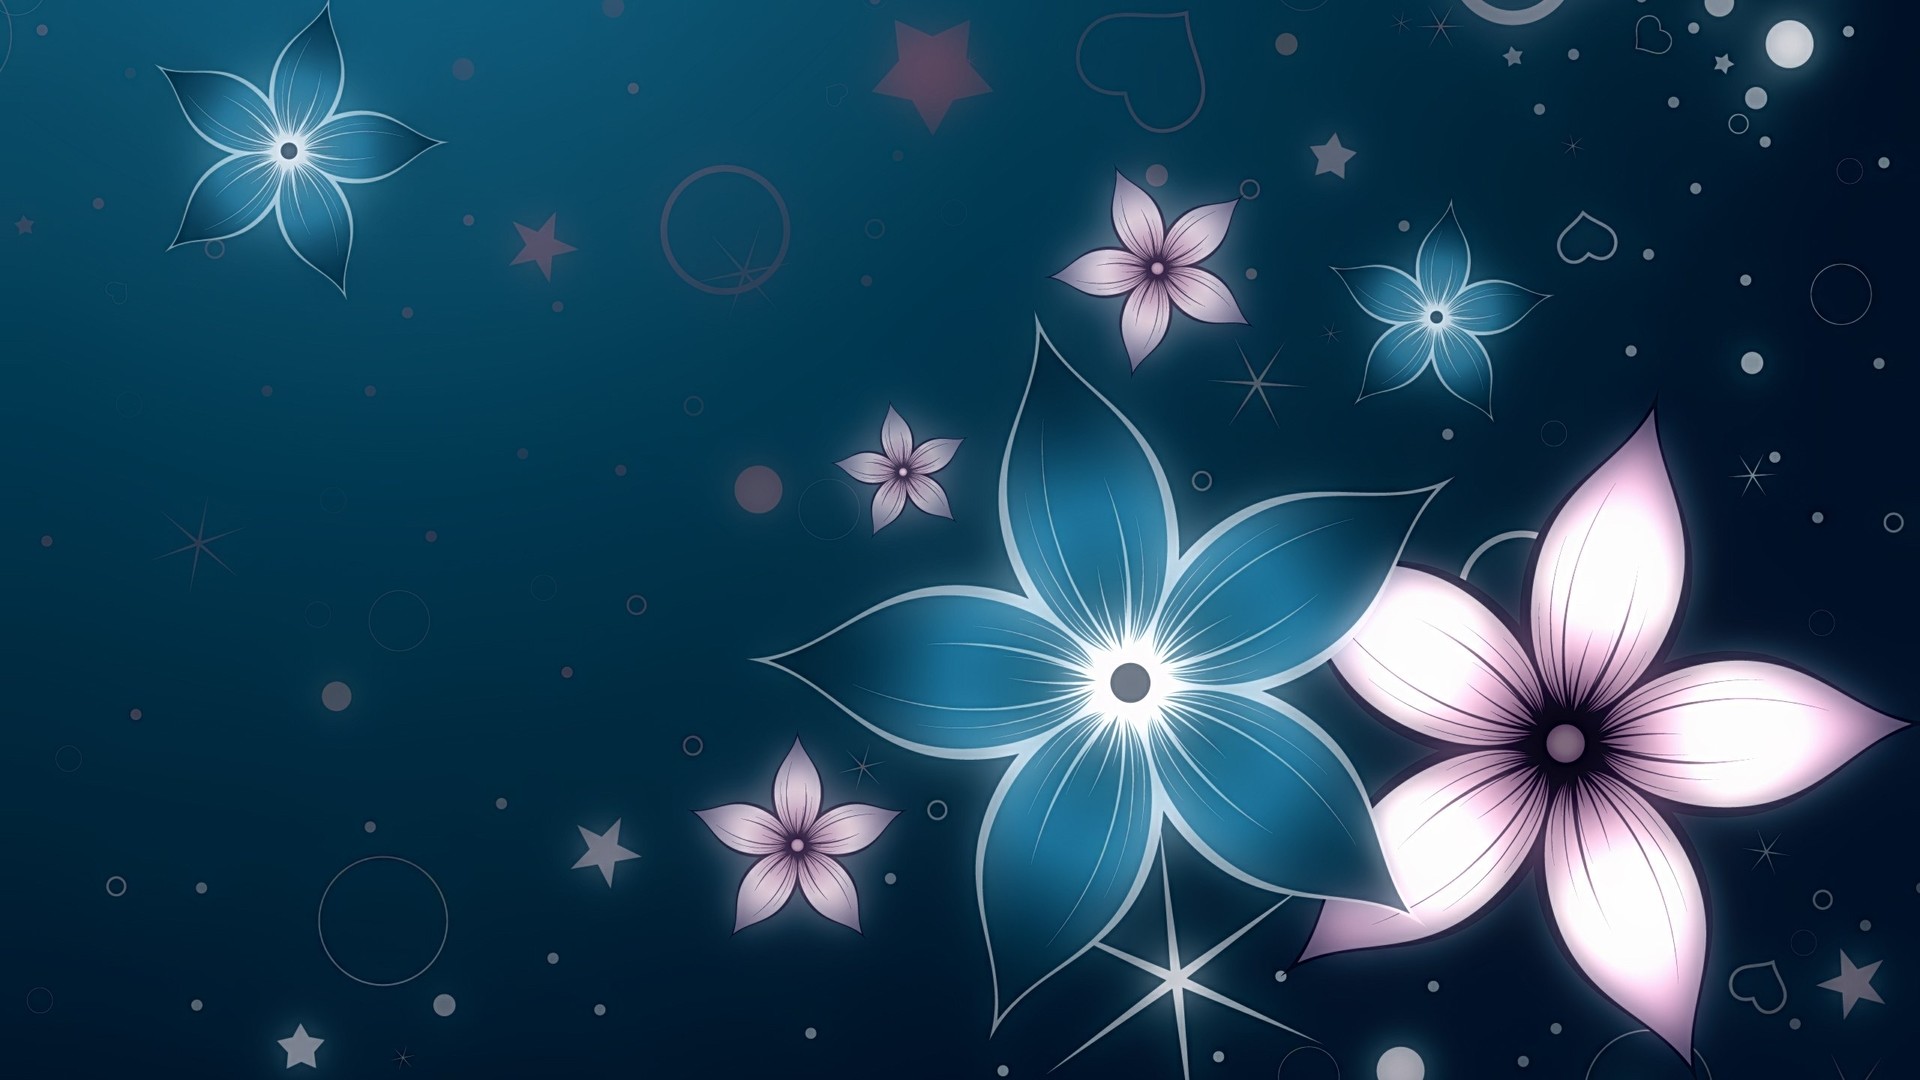 1920x1080 Free Vector Abstract Background for Design Vector Art